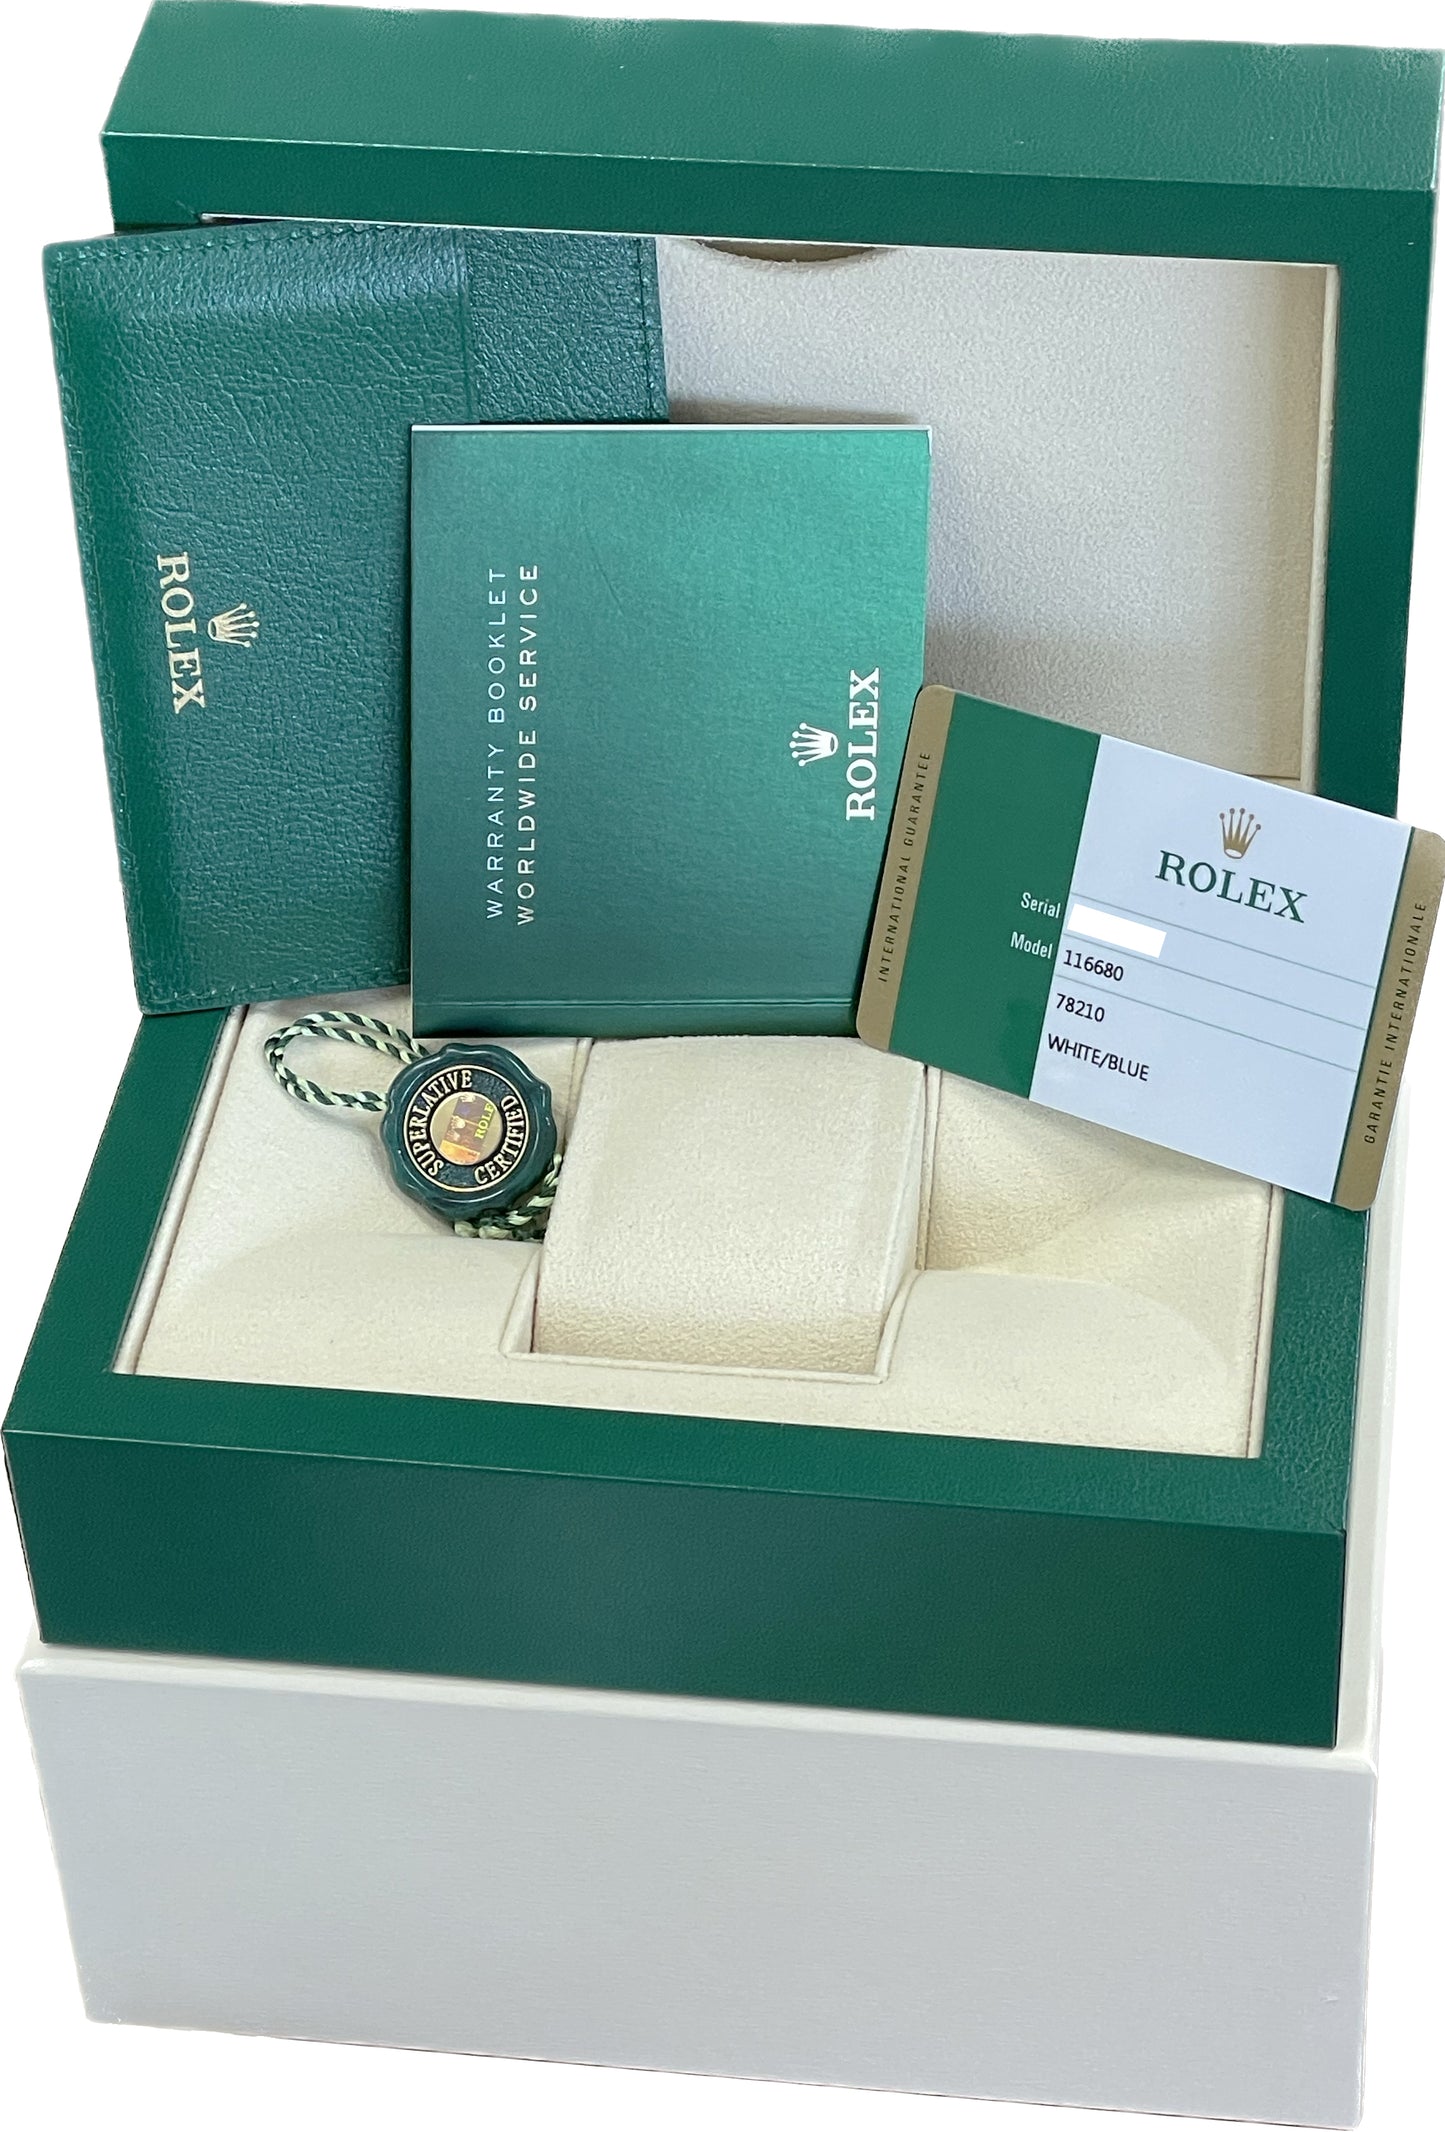 Rolex Yacht-Master II PAPERS 44mm NEW HANDS Stainless White 116680 Watch B+P